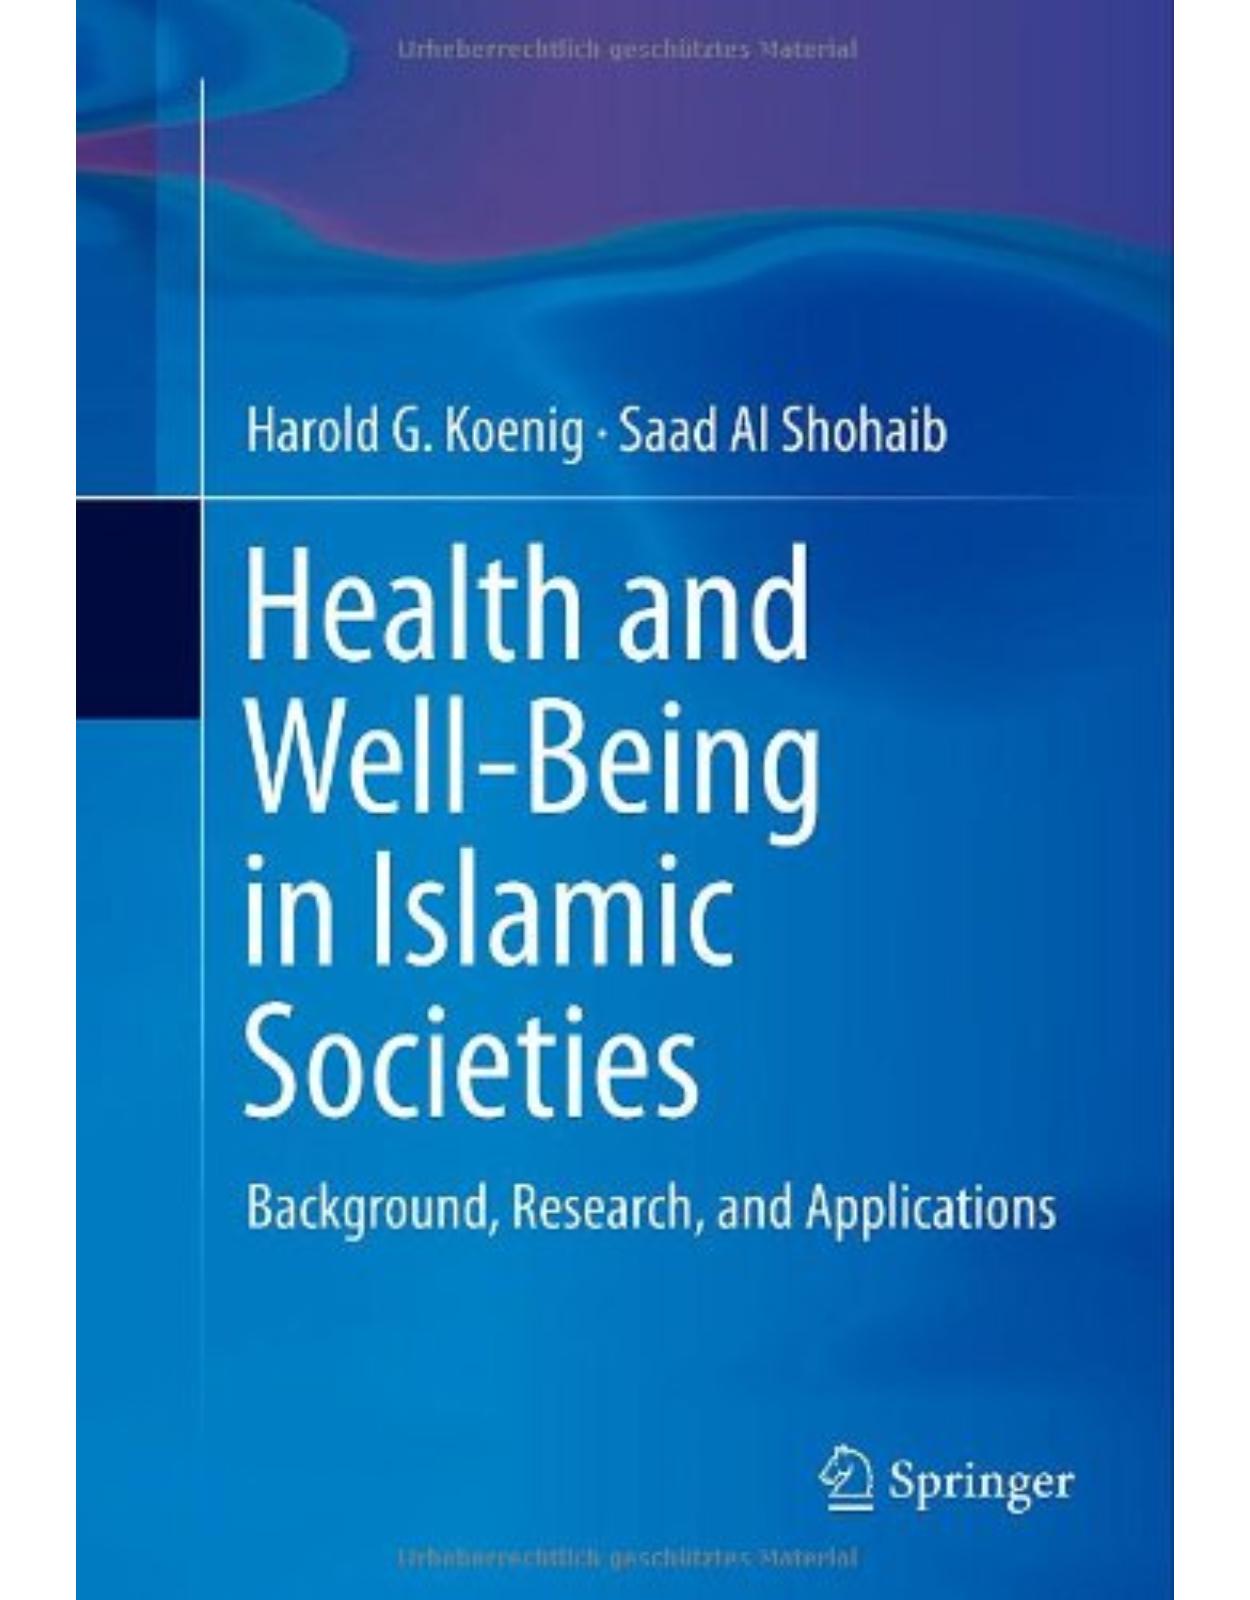 Health and WellBeing in Islamic Societies